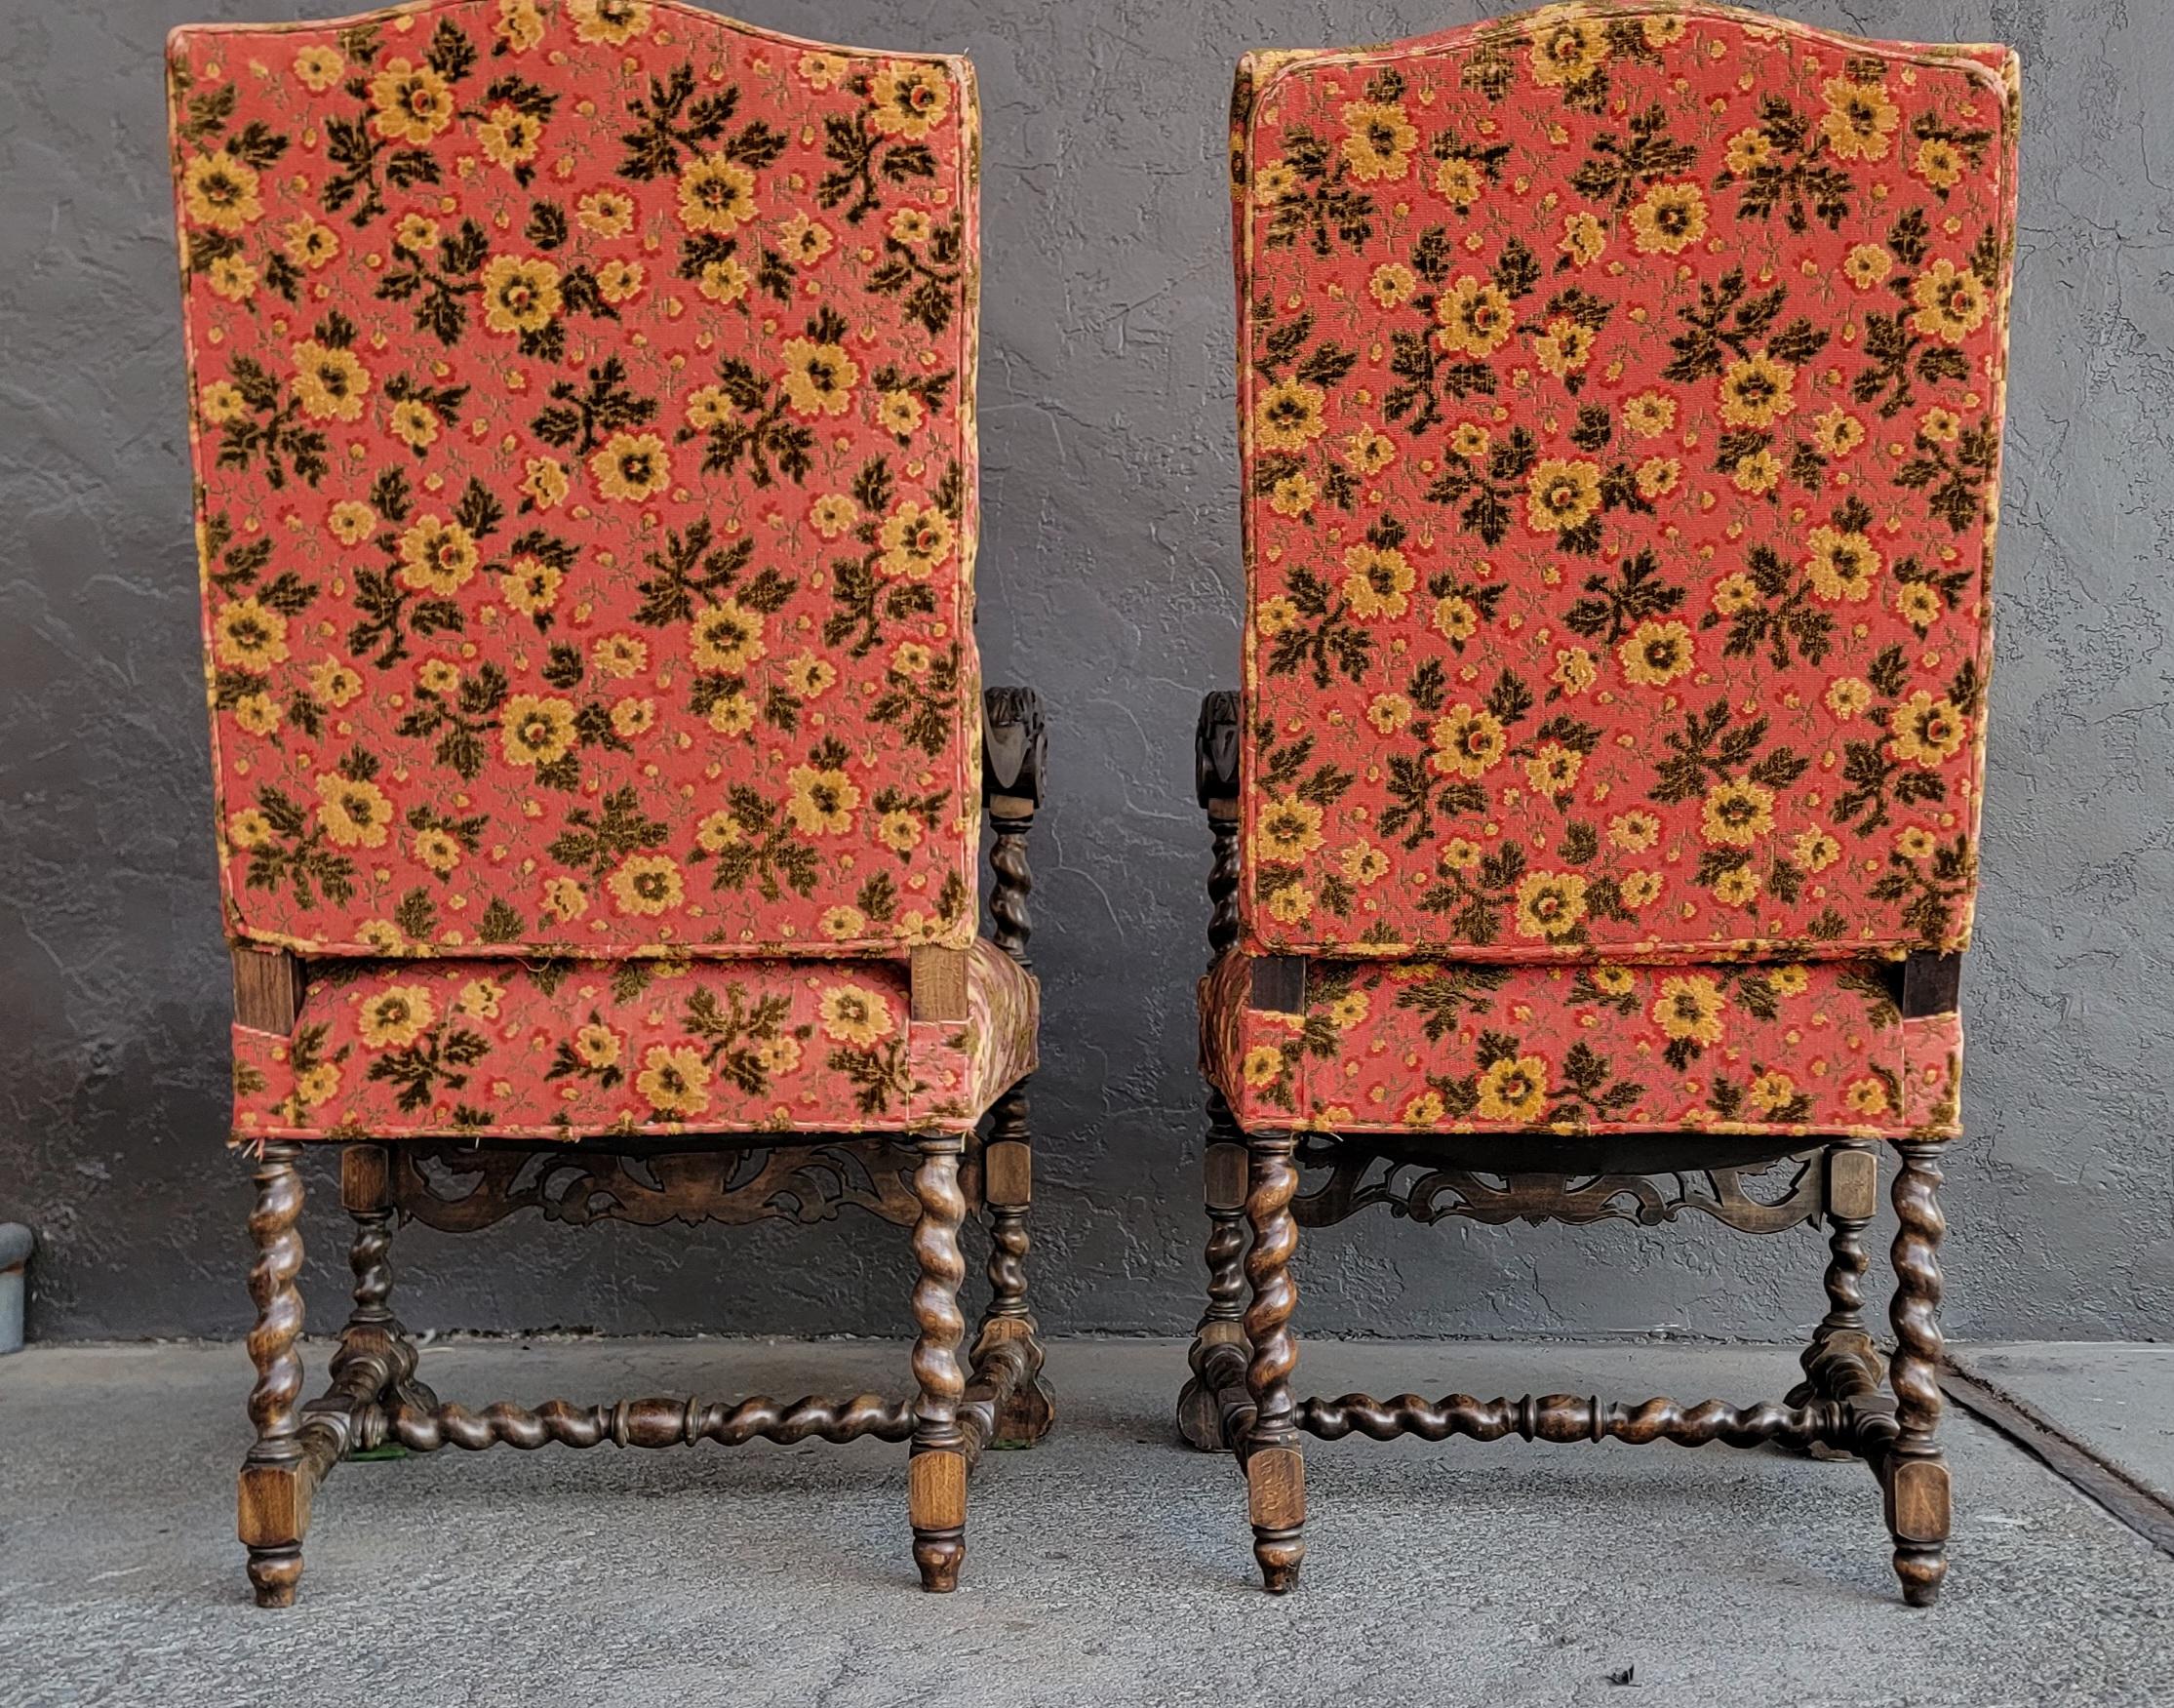 Gothic Revival Throne Chairs a Pair 1920's In Good Condition For Sale In Fulton, CA